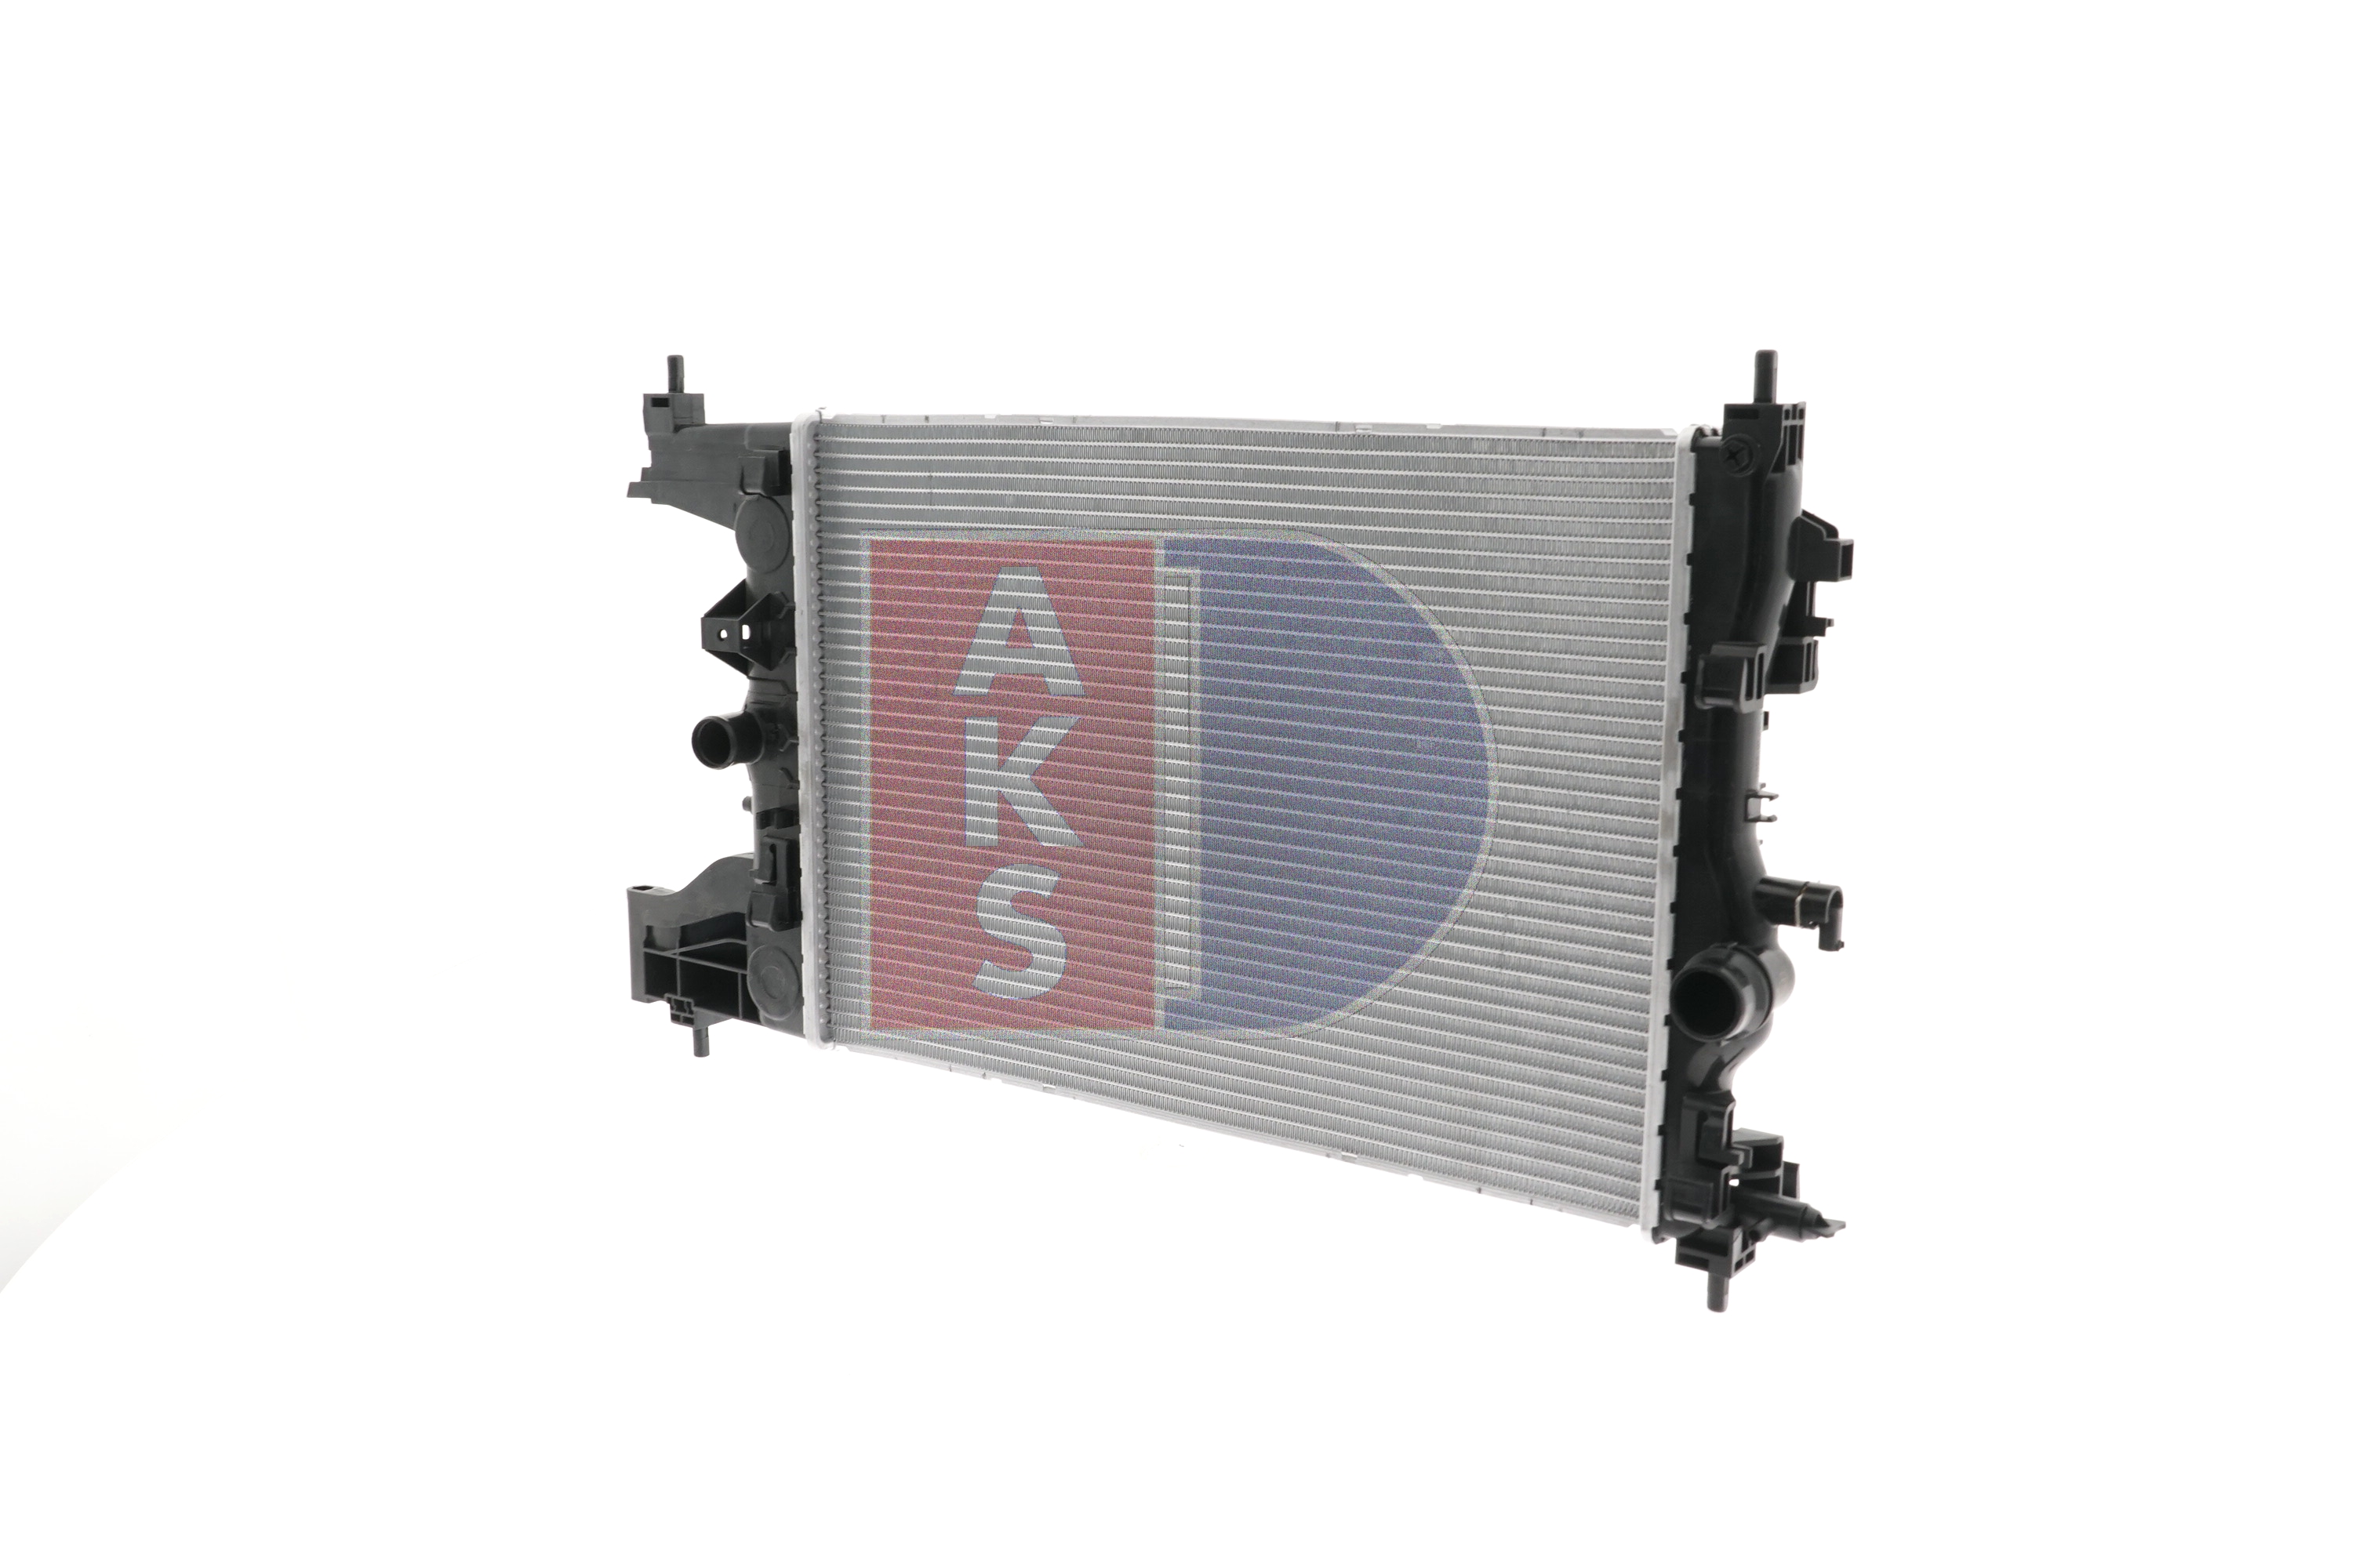 AKS DASIS 150088N Engine radiator Plastic, Aluminium, for vehicles with/without air conditioning, 580 x 395 x 16 mm, Manual Transmission, Brazed cooling fins